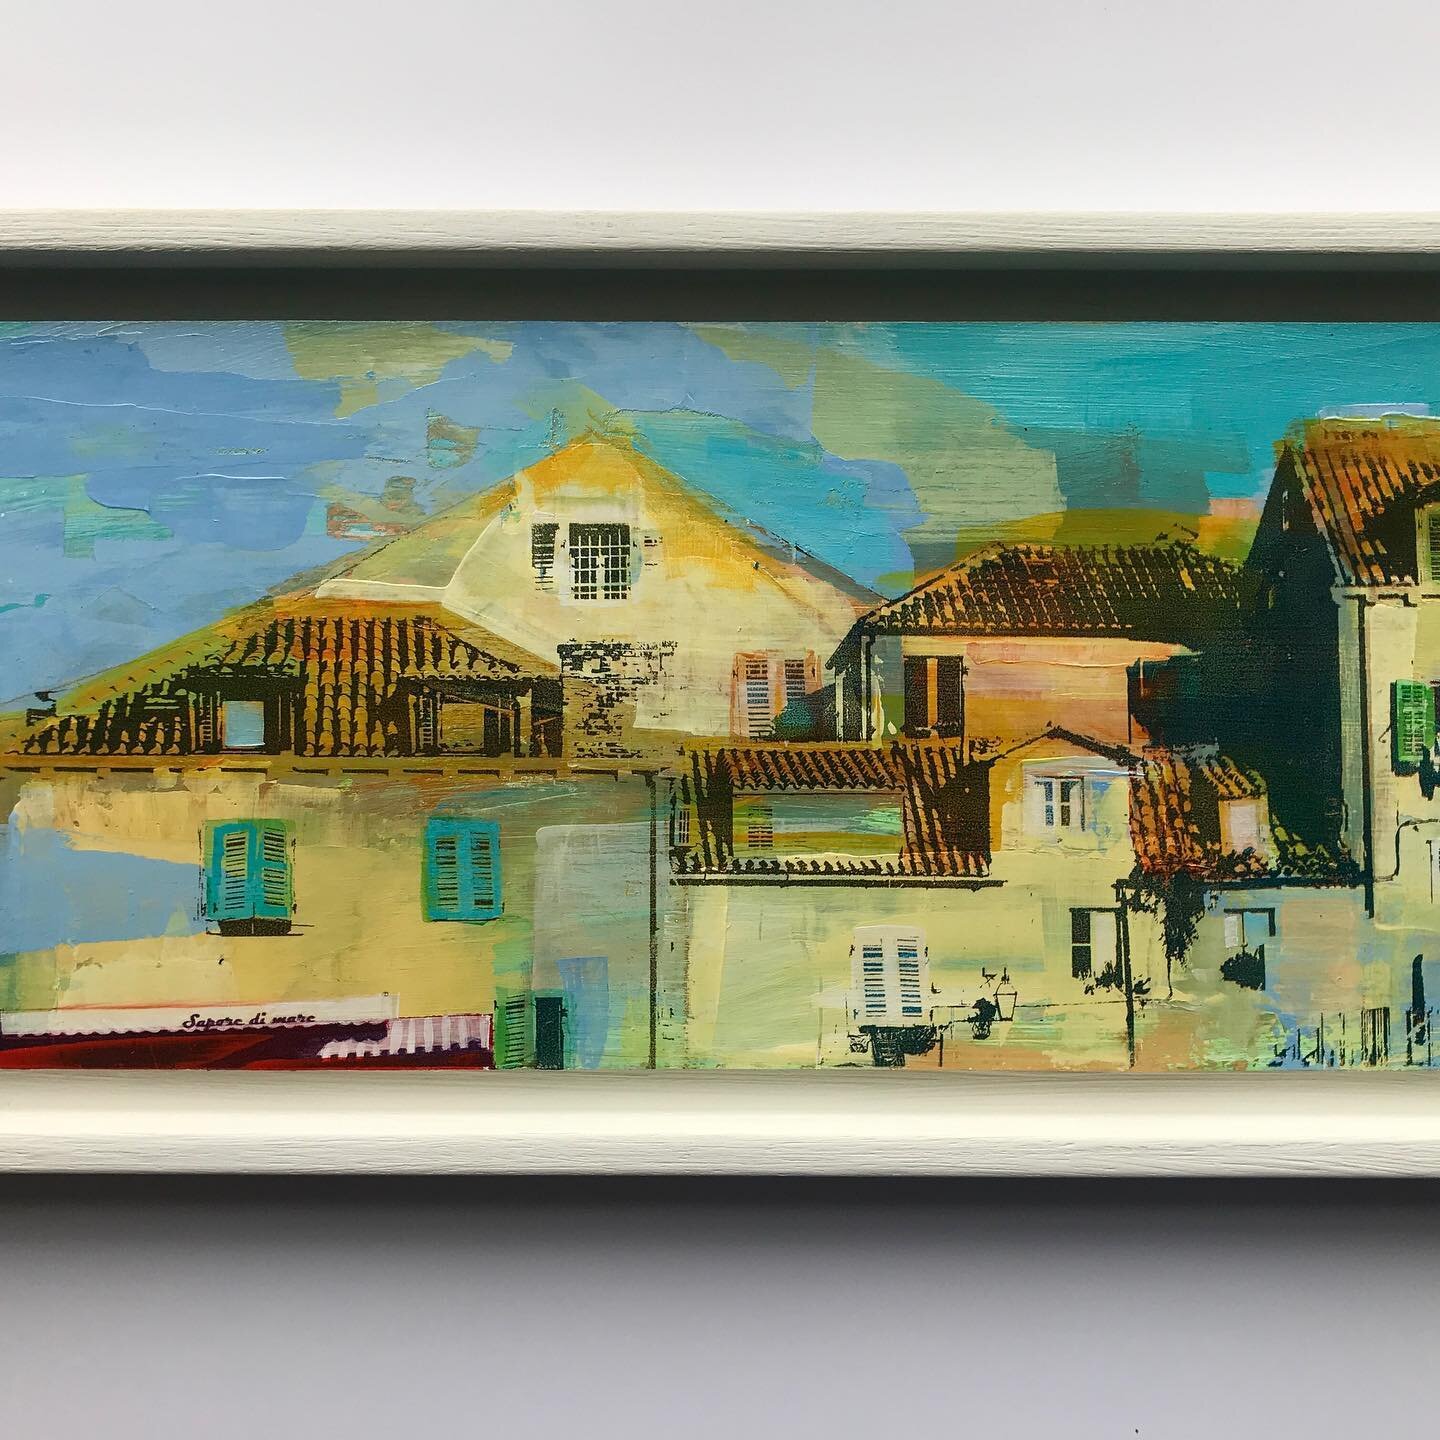 Dubrovnik has a friend! Acrylic and screen print on wooden panel 42cm x 18cm, reminding me of hot summer days #holidays #painting #acrylicpainting #screenprinting  #colour